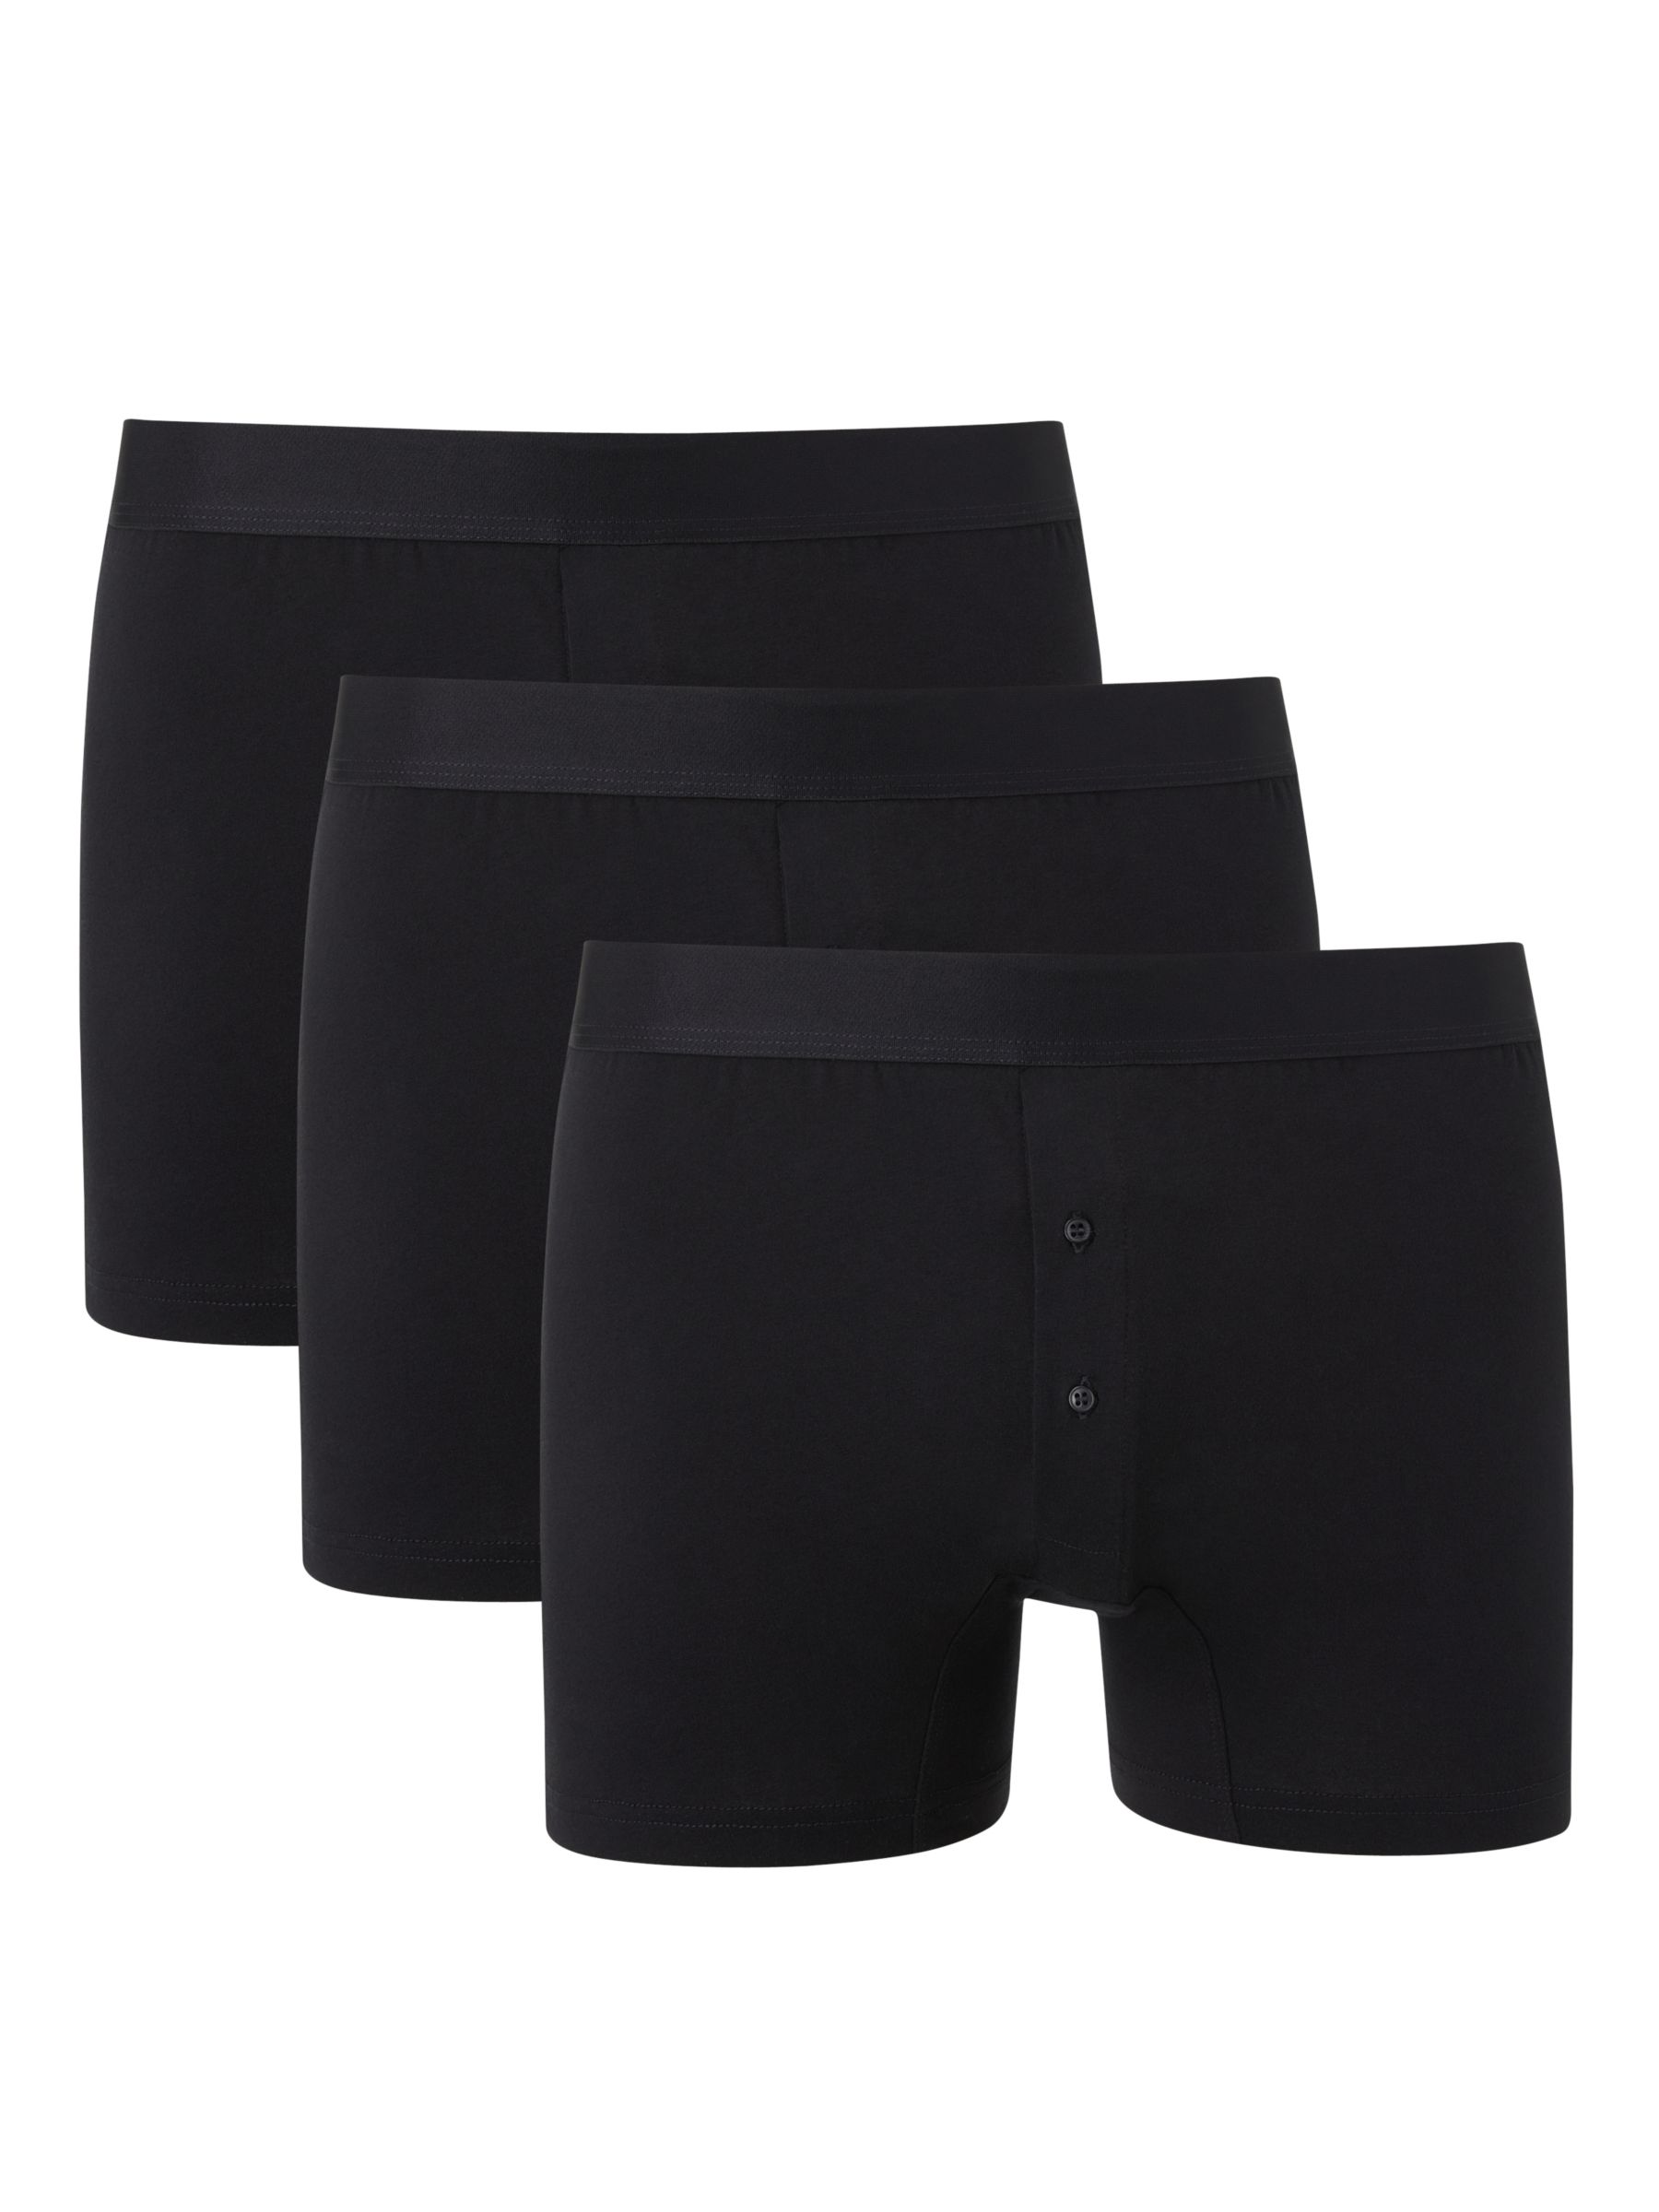 John Lewis Organic Cotton Button Fly Trunks, Pack of 3, Black, S